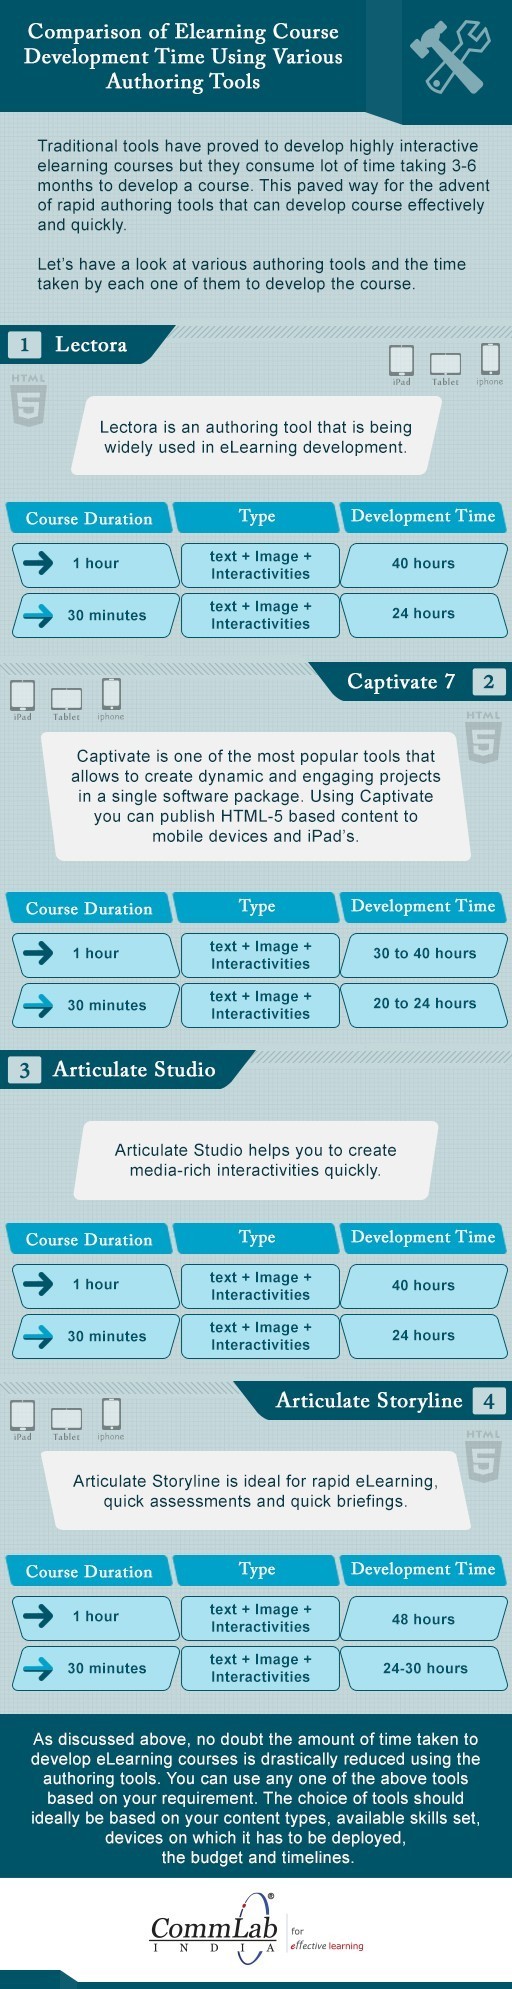 Comparison of eLearning Development Time Using Tools – An Infographic thumbnail